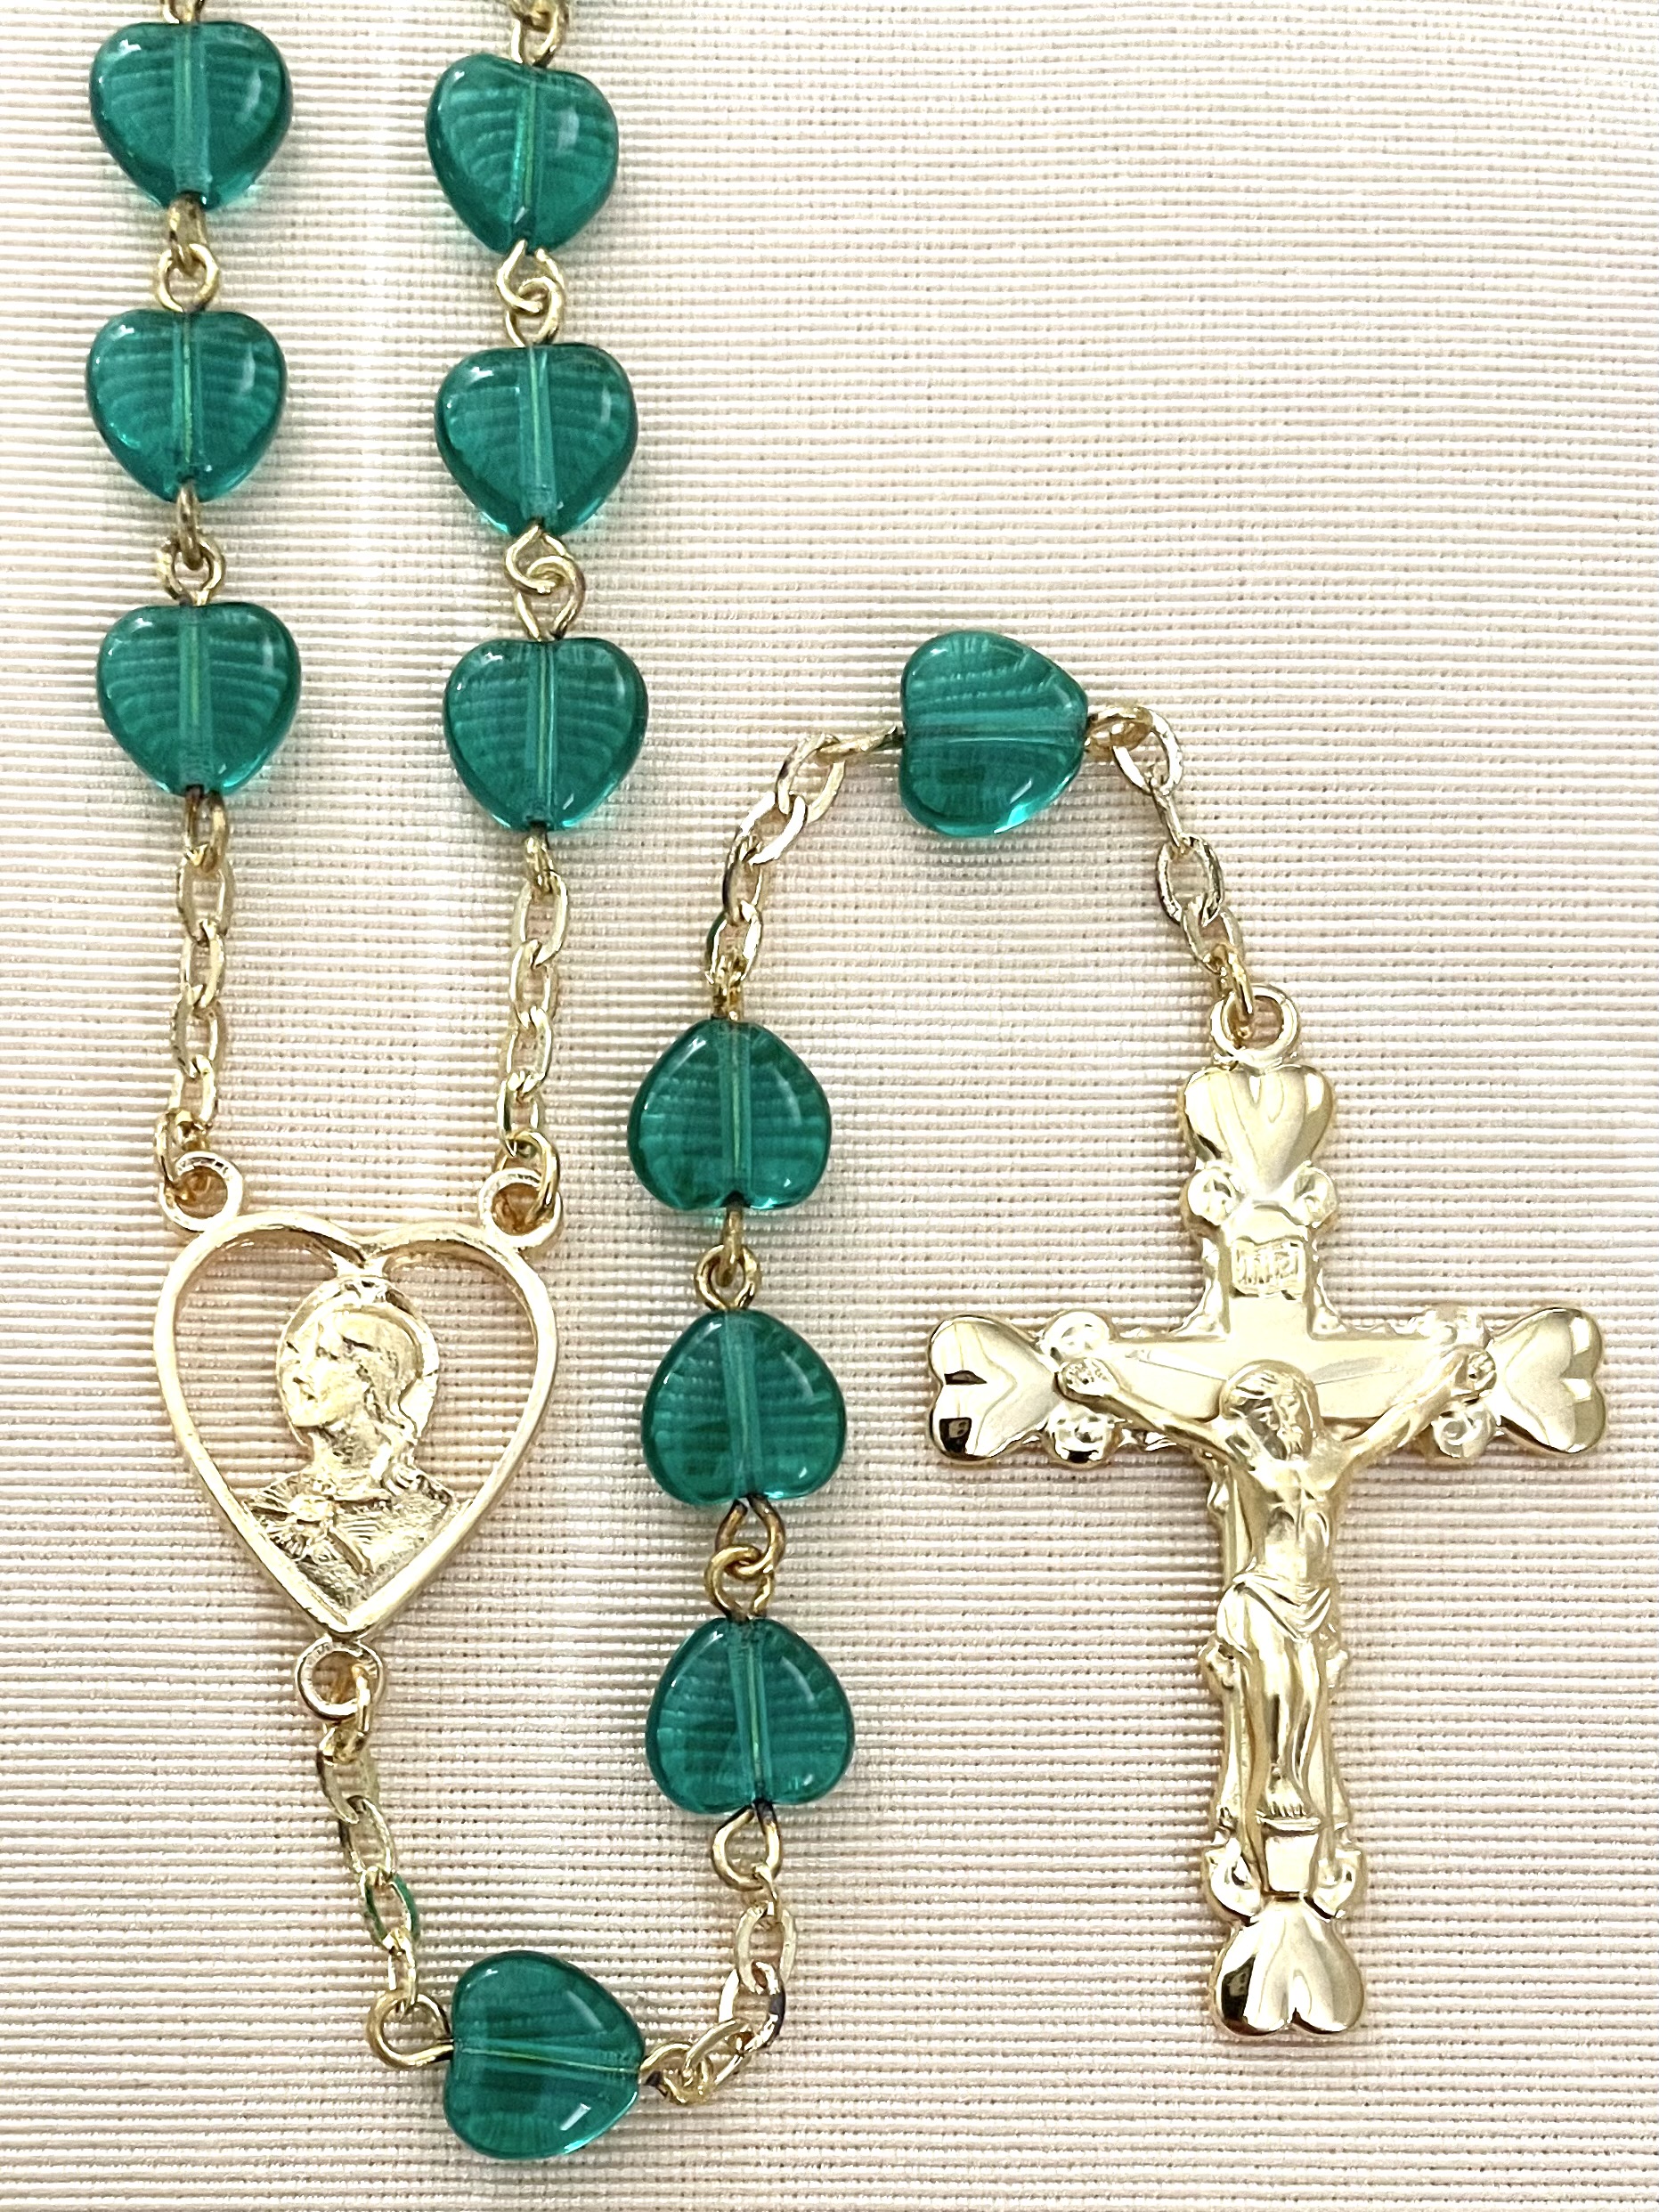 8x8mm EMERALD HEART SHAPPED ROSARY WITH GOLD PLATED CRUCIFIX AND CENTER GIFT BOXED